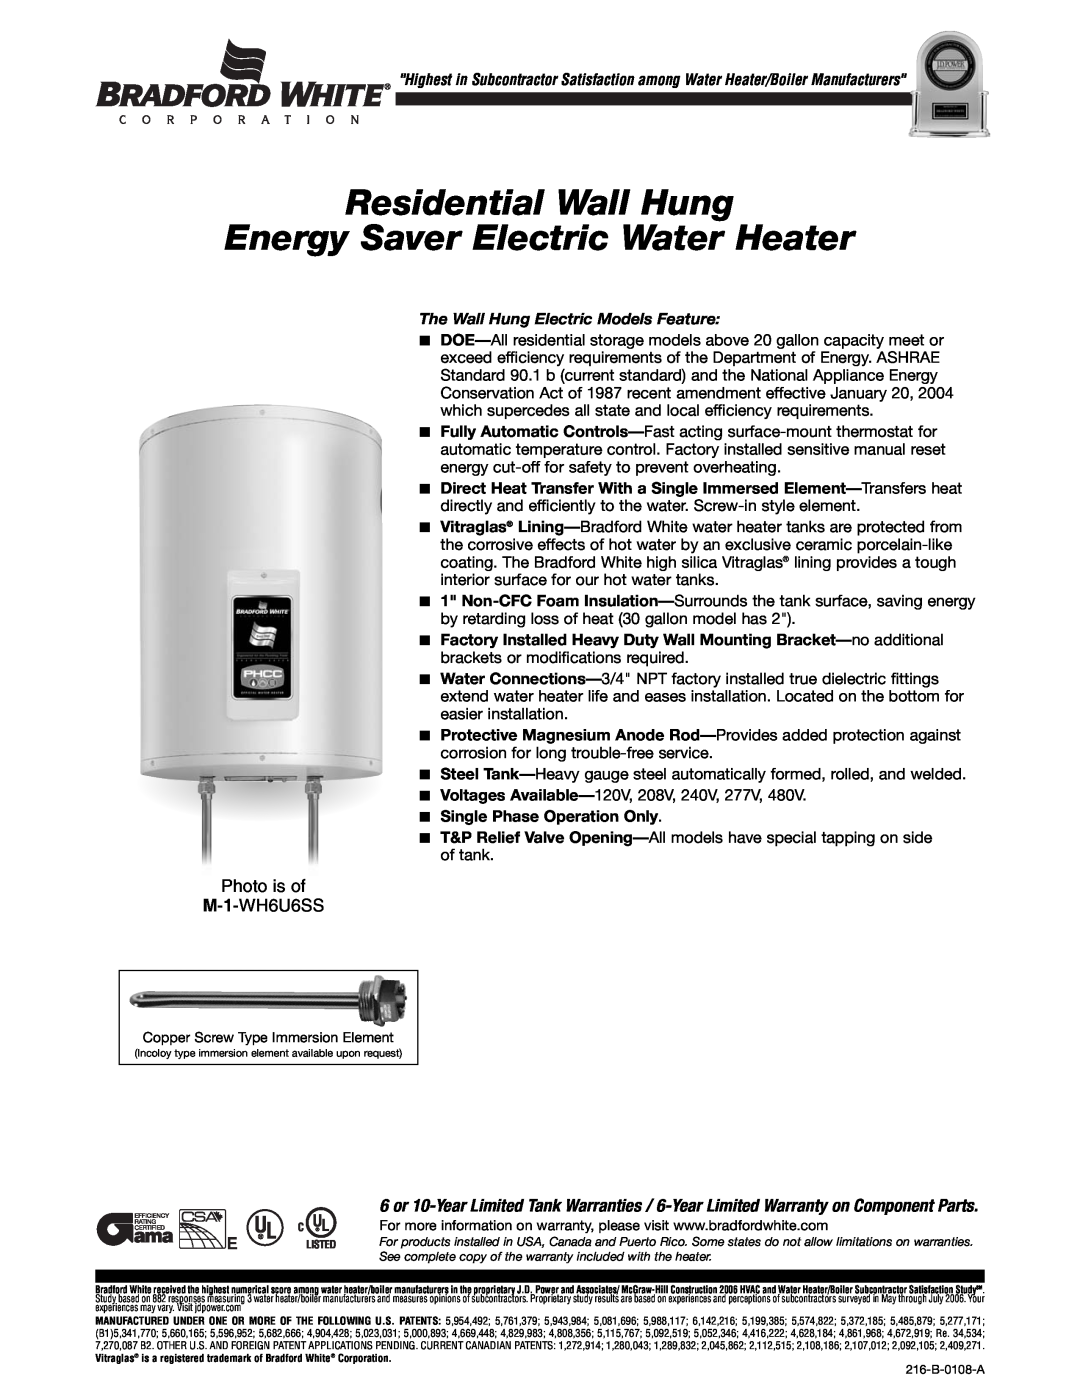 Bradford-White Corp 216-B warranty Residential Wall Hung Energy Saver Electric Water Heater, Photo is of M-1-WH6U6SS 